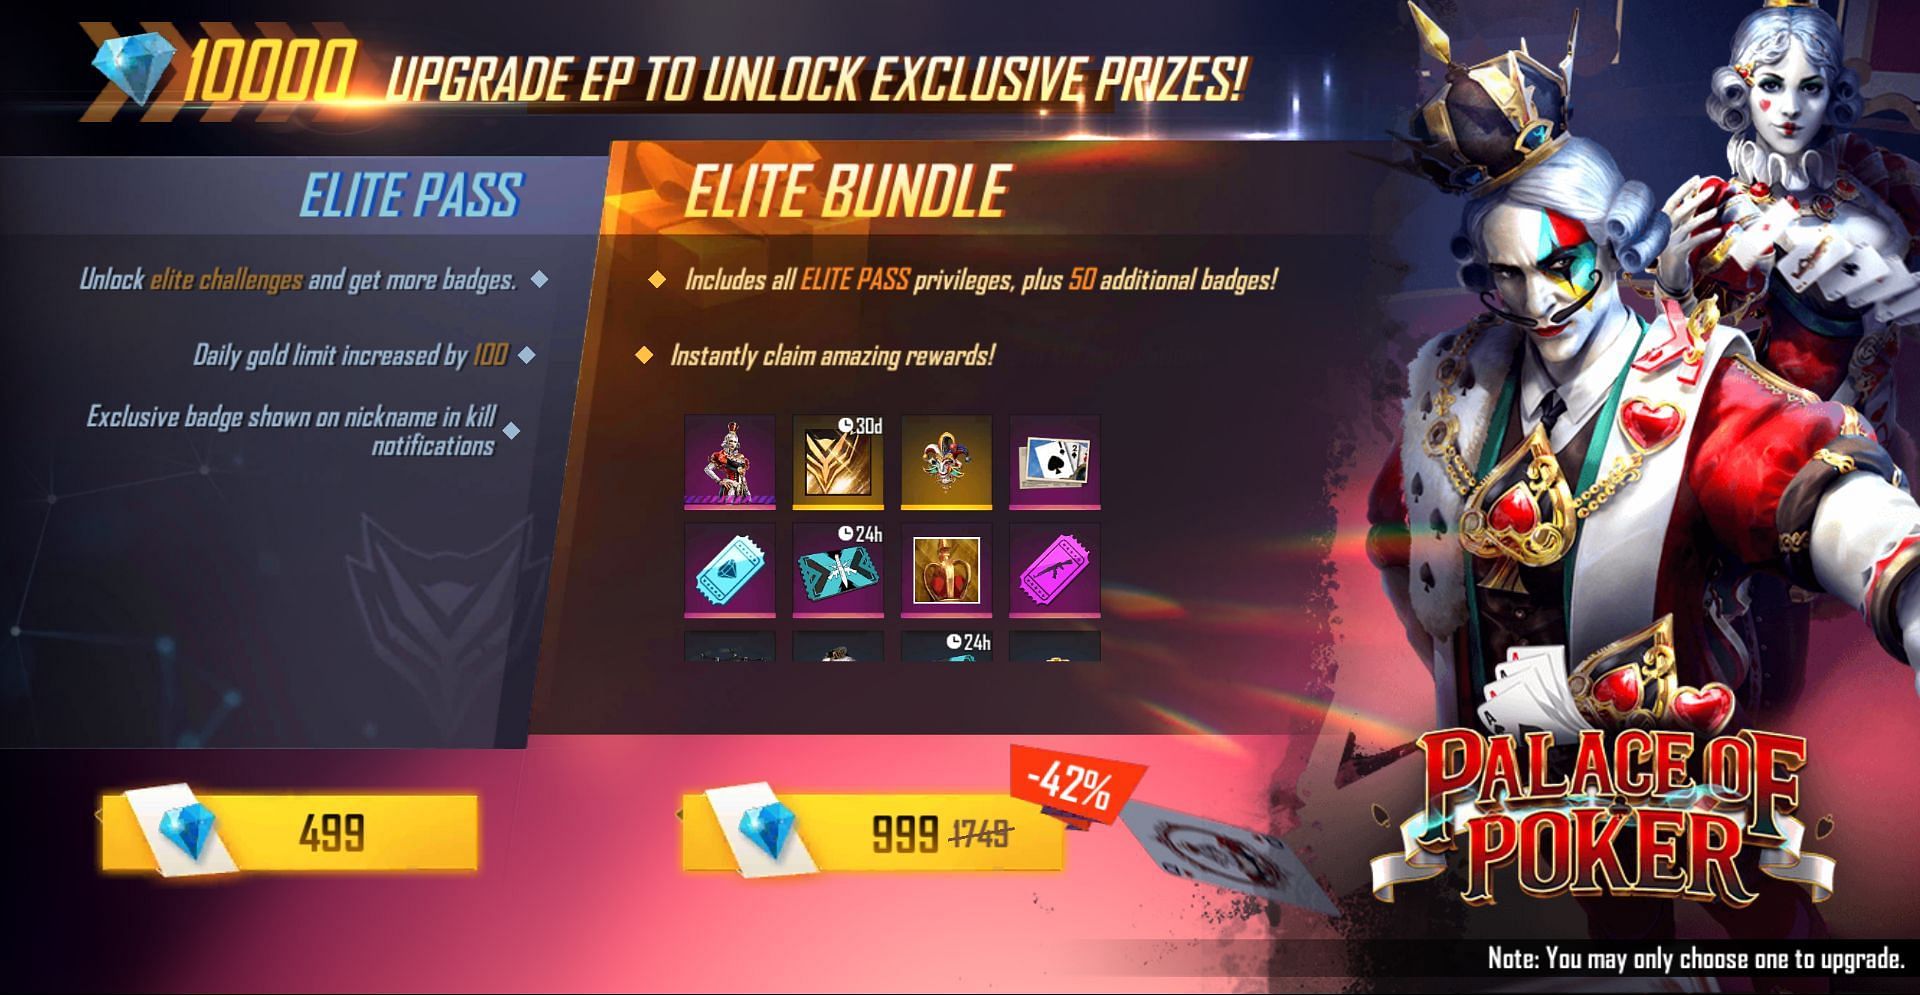 The Palace of Joker pass can be purchased for these prices (Image via Free Fire)